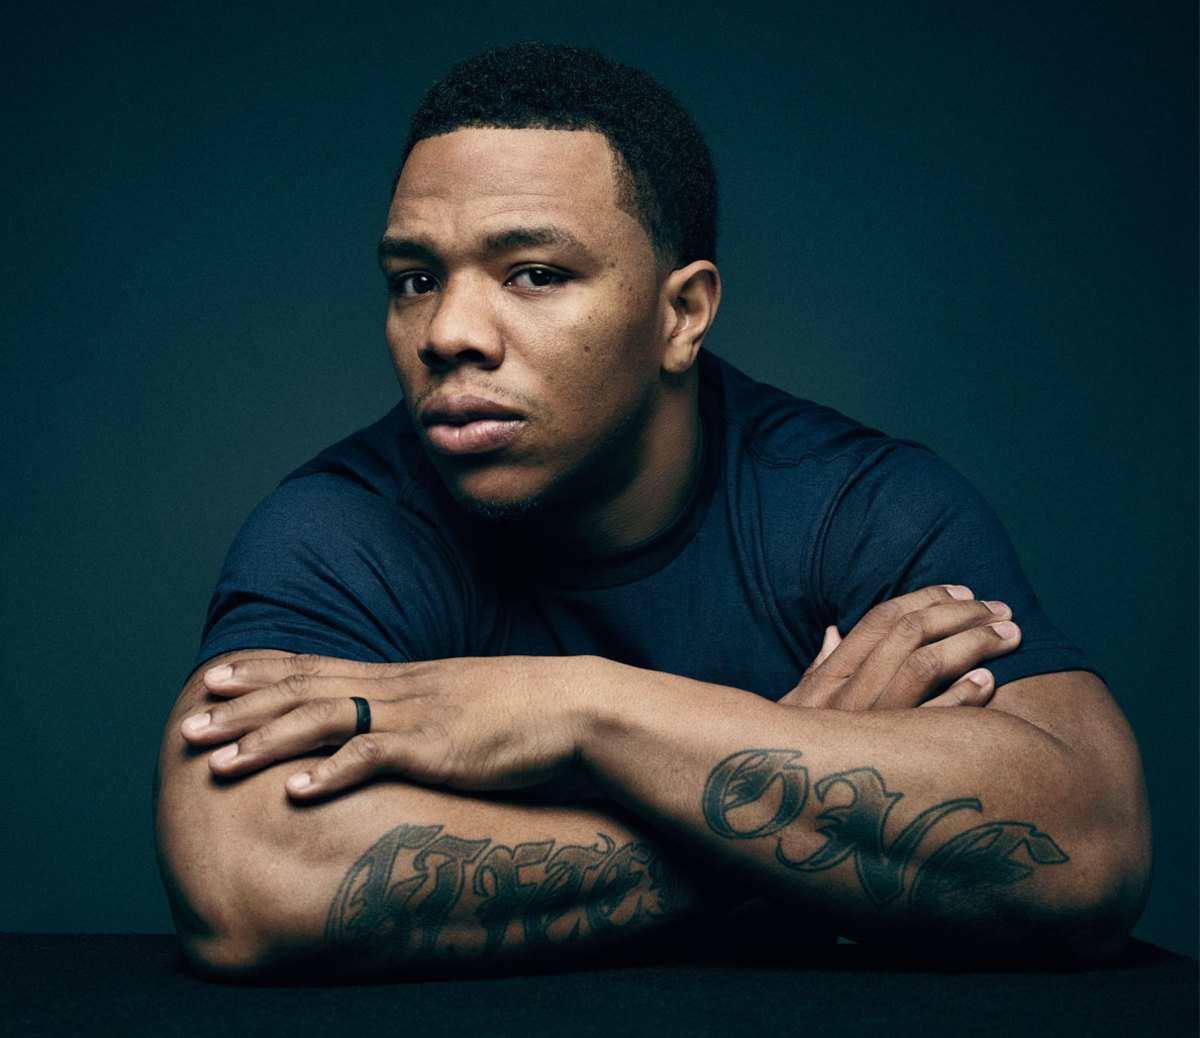 What Happened To Ray Rice? (Complete Story)